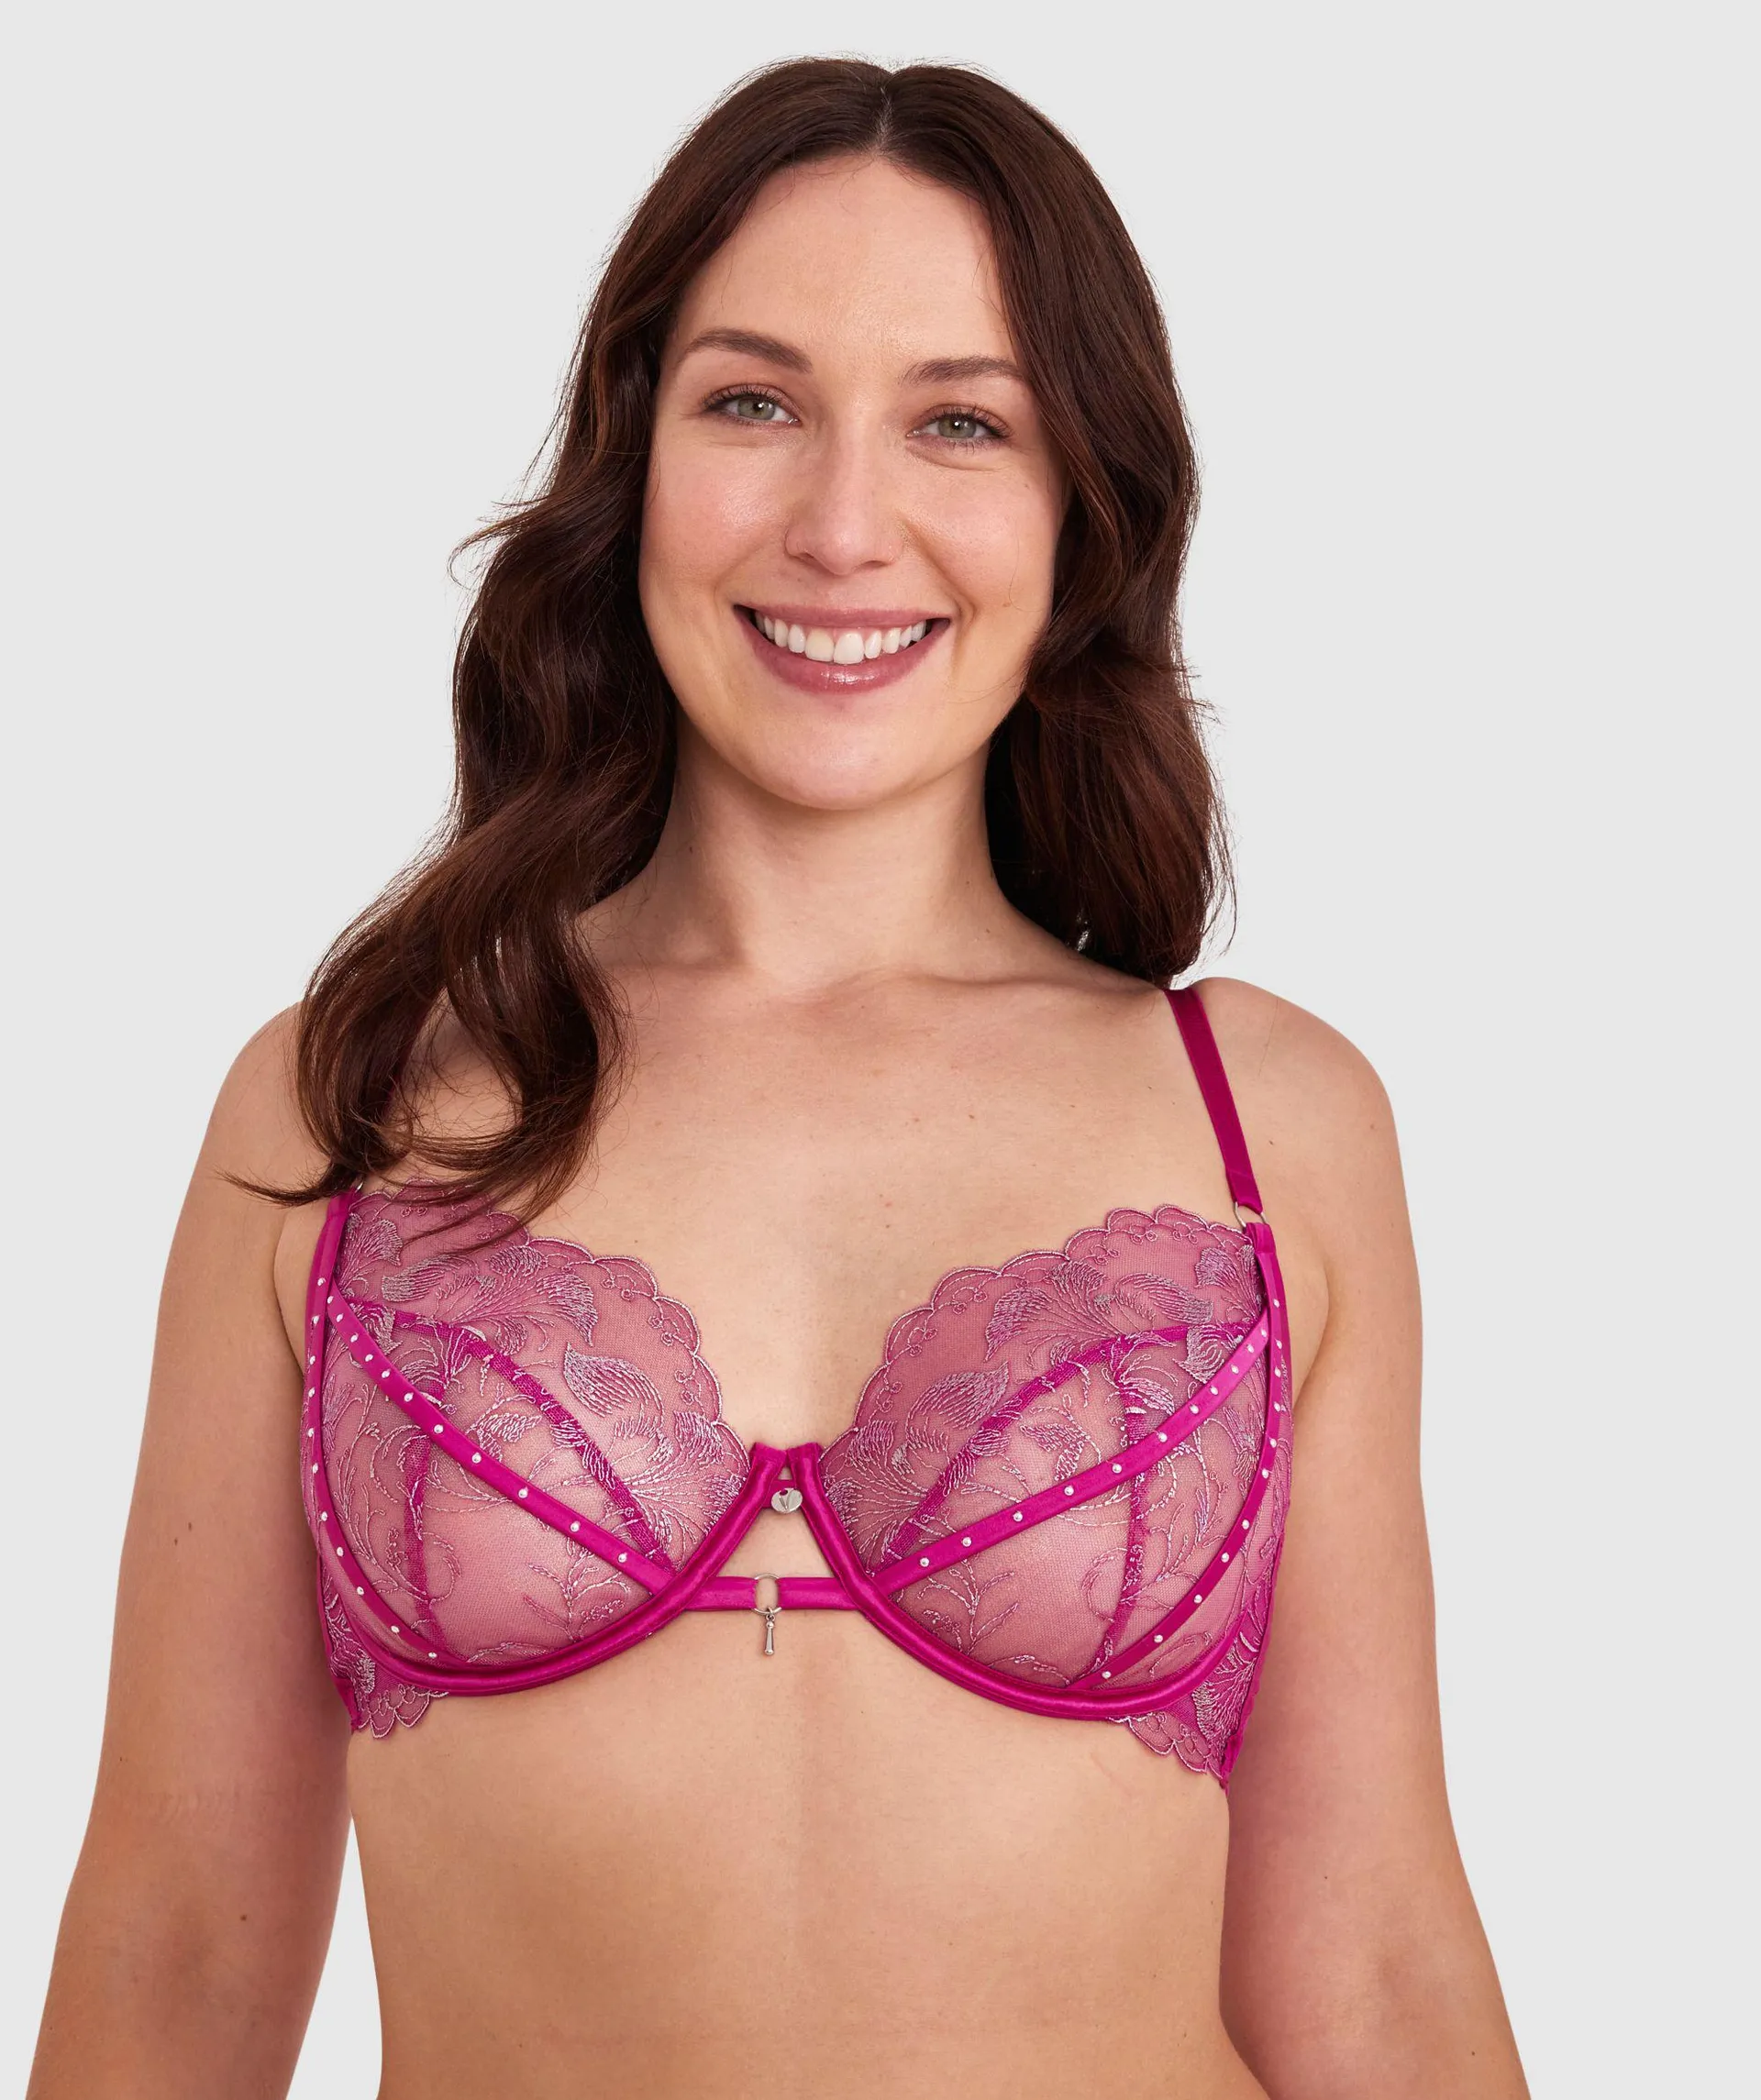 Vamp Dolce Full Cup Underwire Bra - Pink